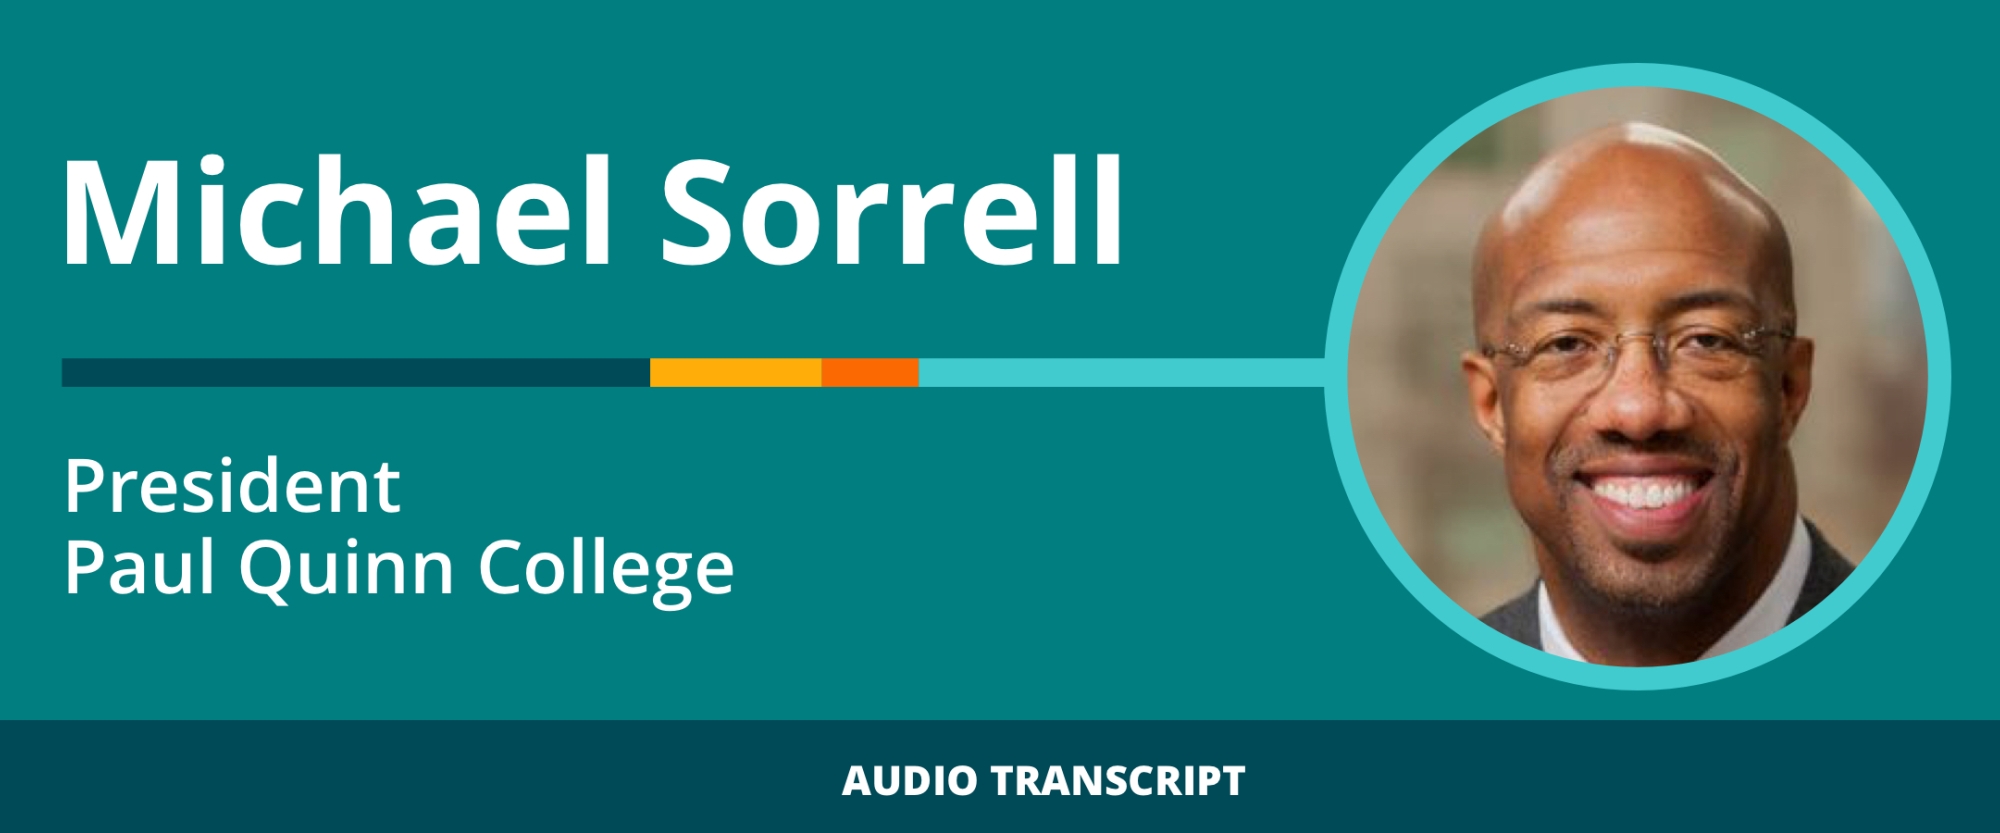 Weekly Wisdom 1/10/22: Transcript of Conversation With Michael Sorrell, President, Paul Quinn College